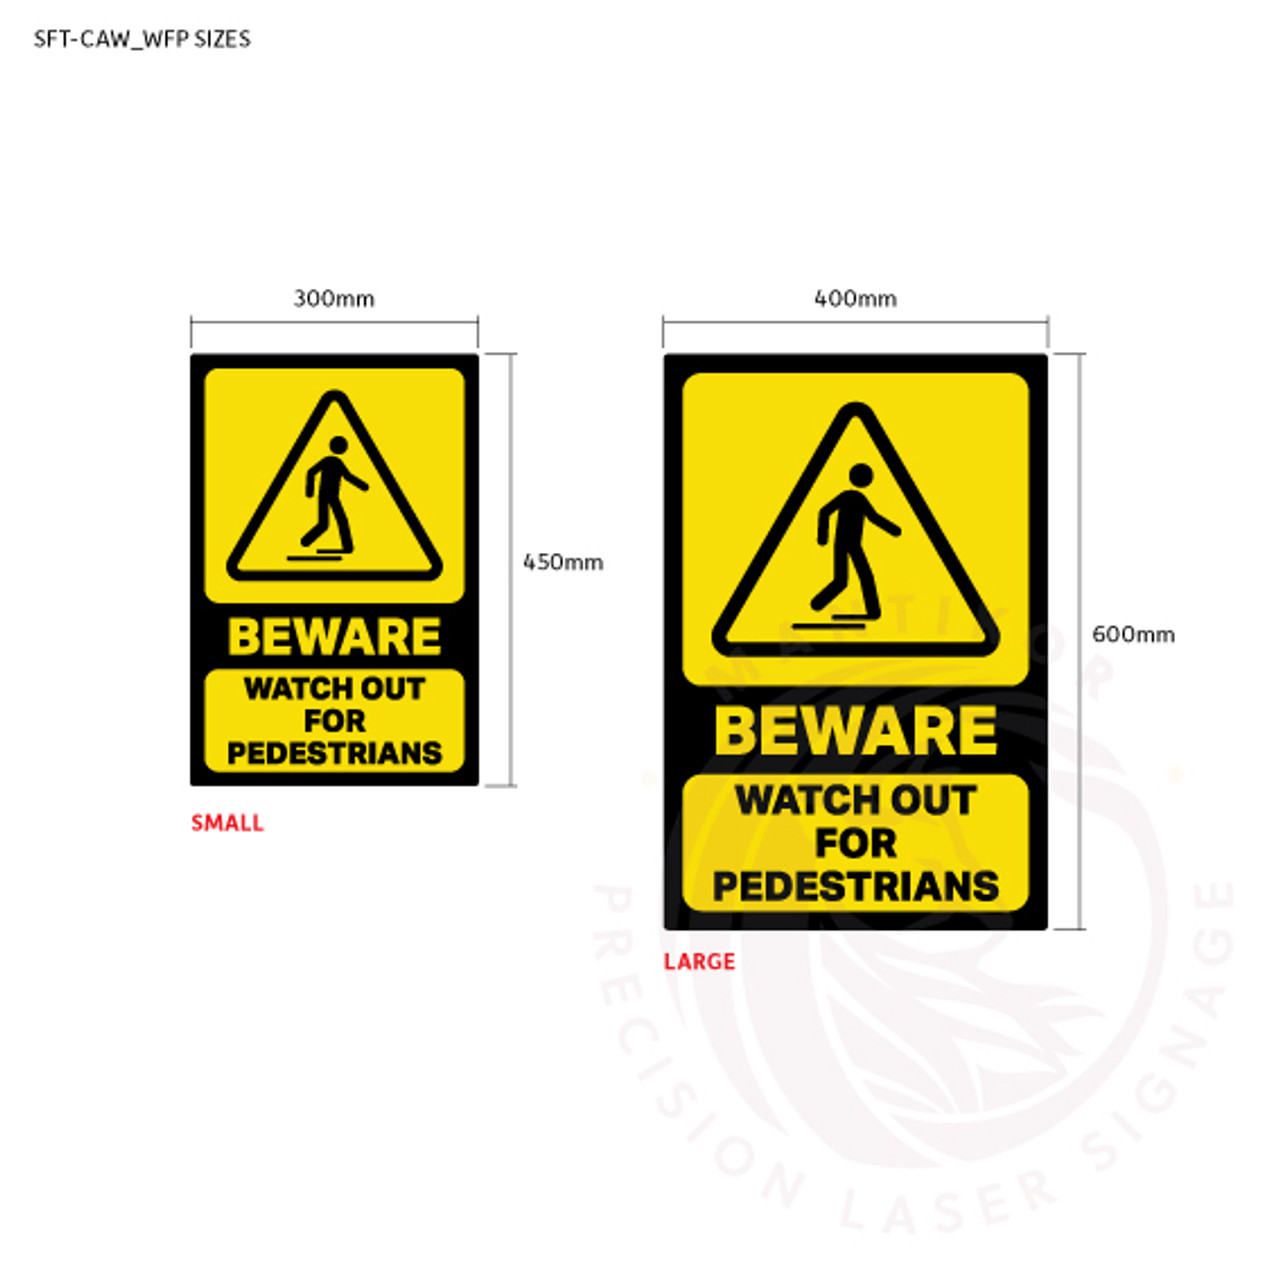 Beware - Watch Out For Pedestrians - Sign sizes